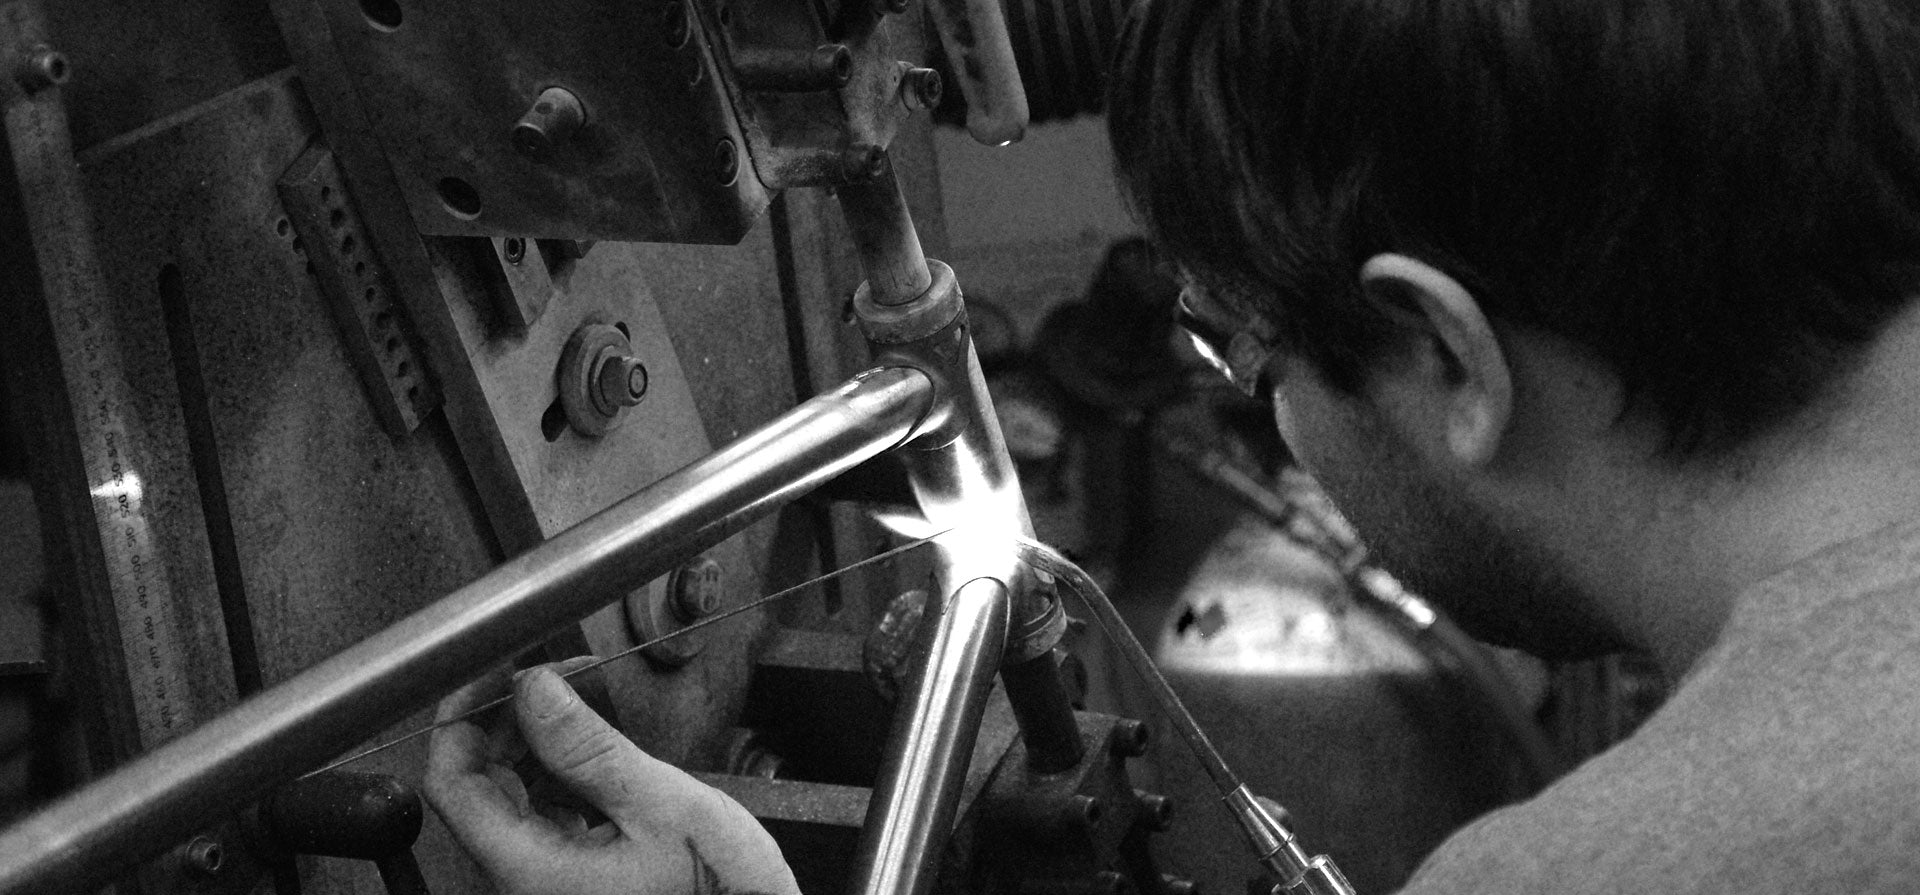 Close-up of a craftsman braising the front lug of a classic bike frame.